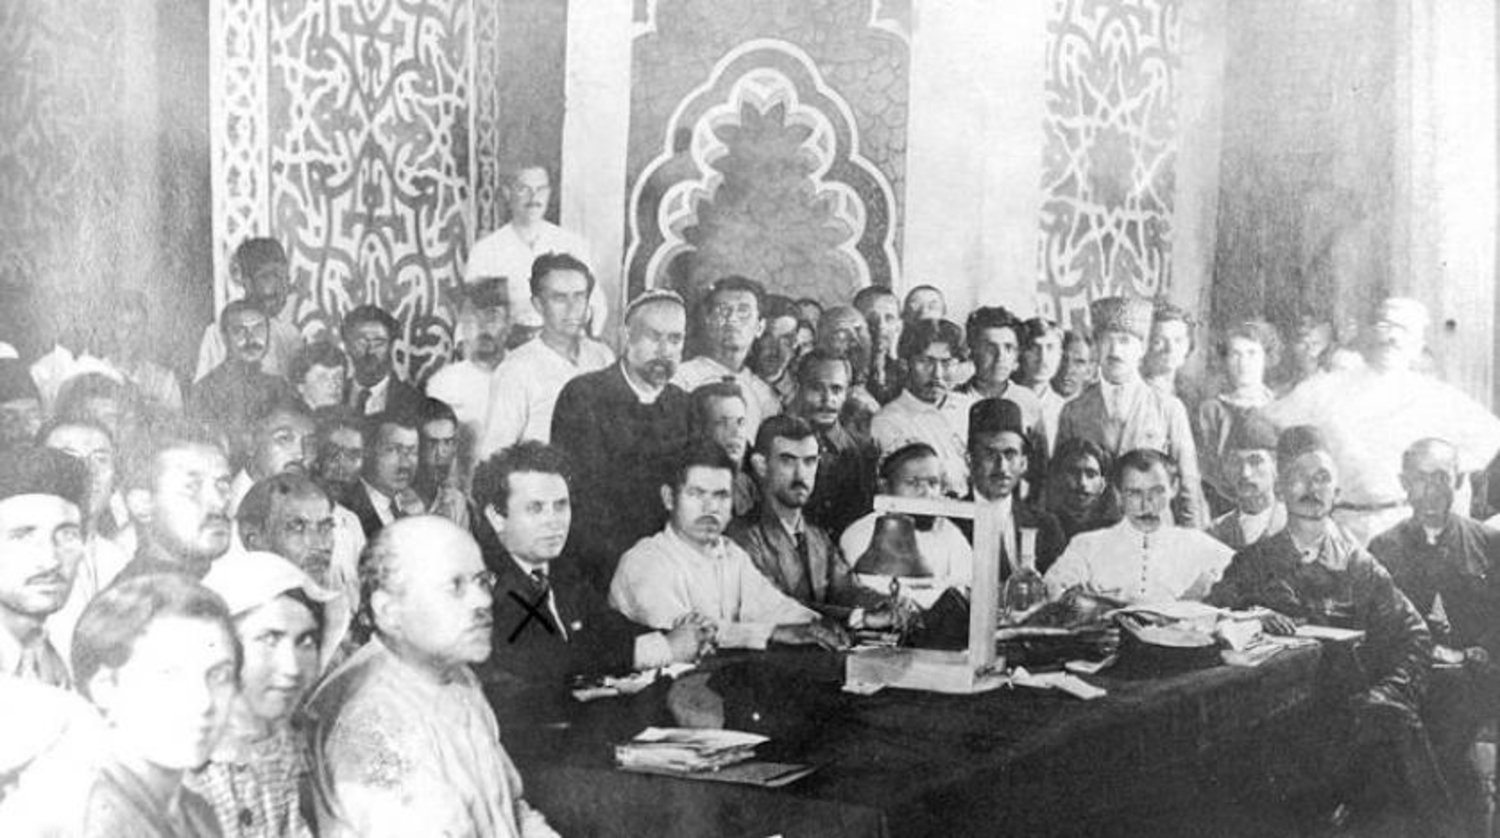 Zinoviev while heading a meeting in Azerbaijan in 1920. Getty images